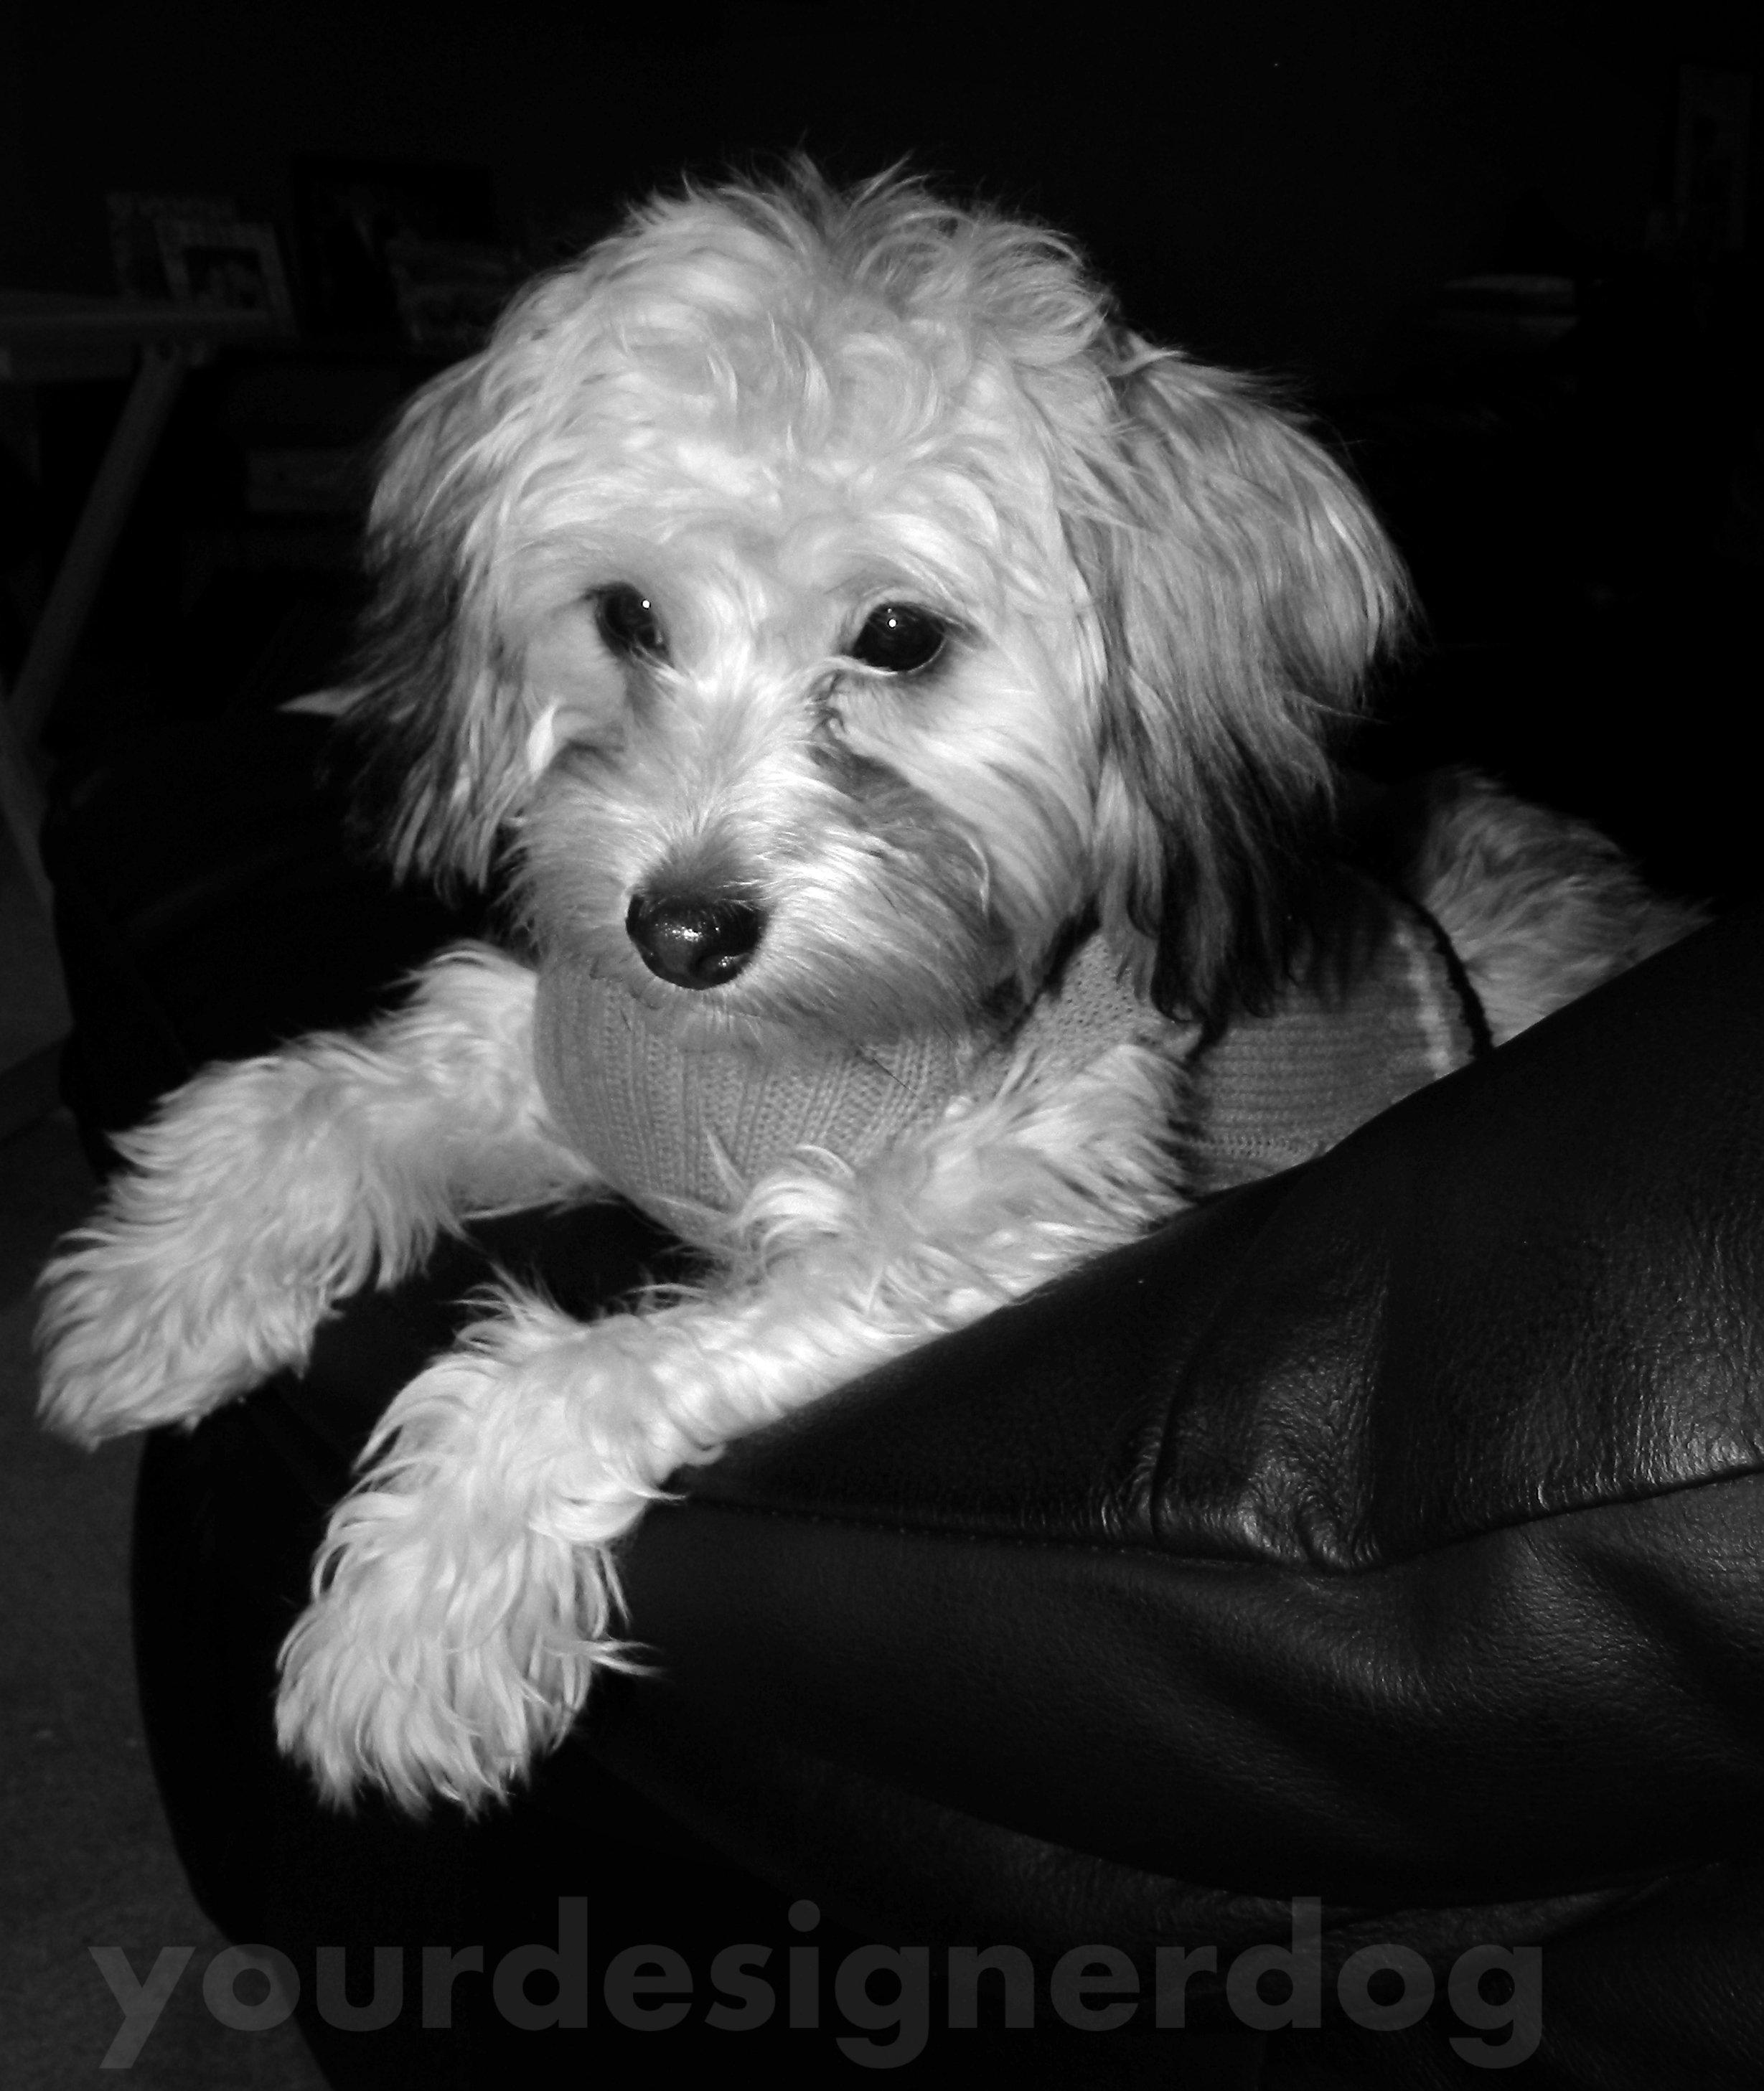 dogs, designer dogs, yorkipoo, yorkie poo, black and white photography